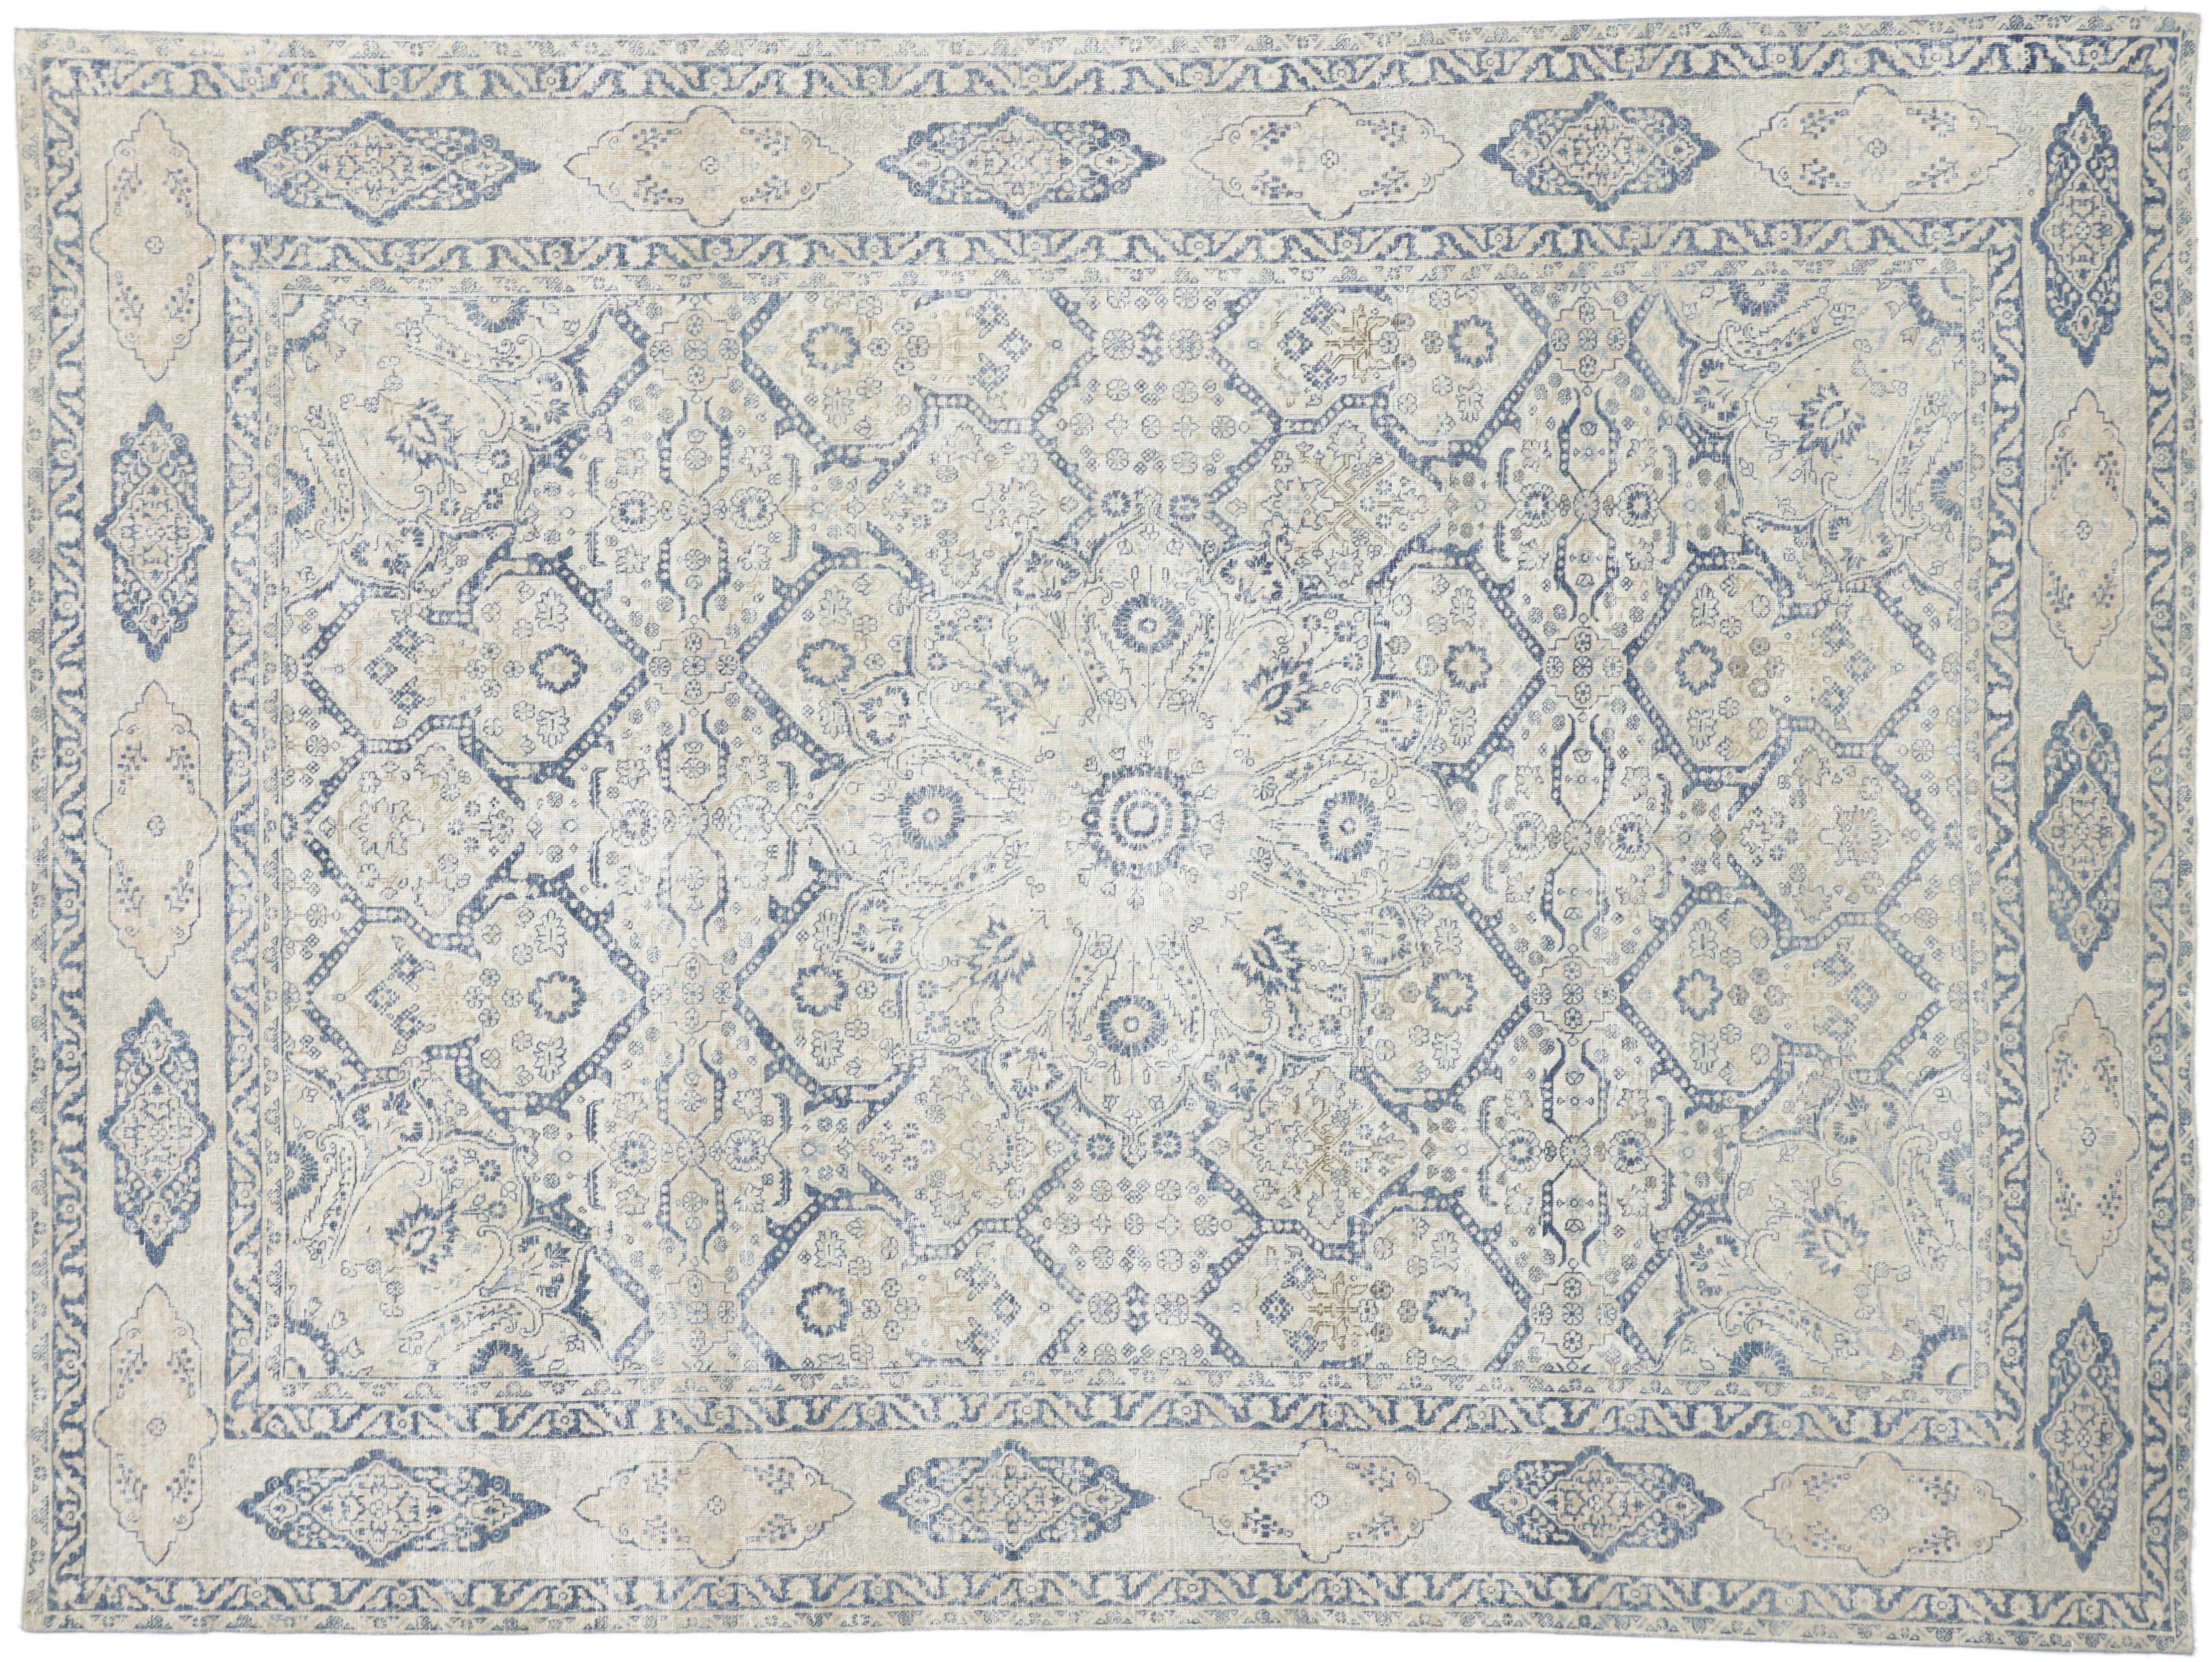 Distressed Antique Turkish Tabriz Rug with Neoclassical Gustavian Style 3